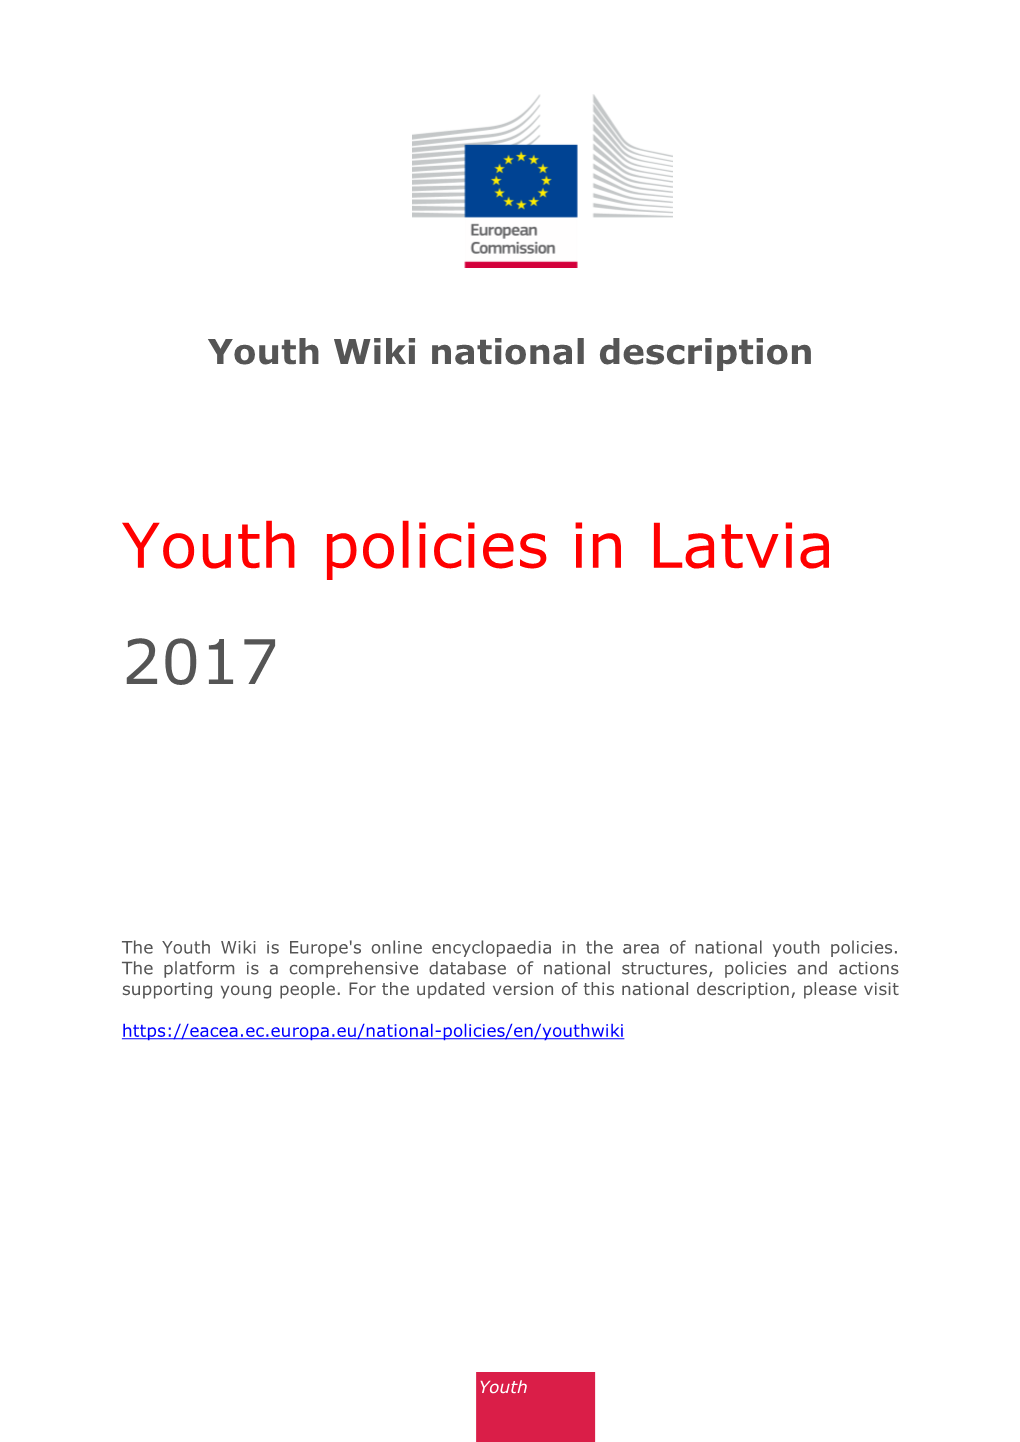 Youth Policies in Latvia